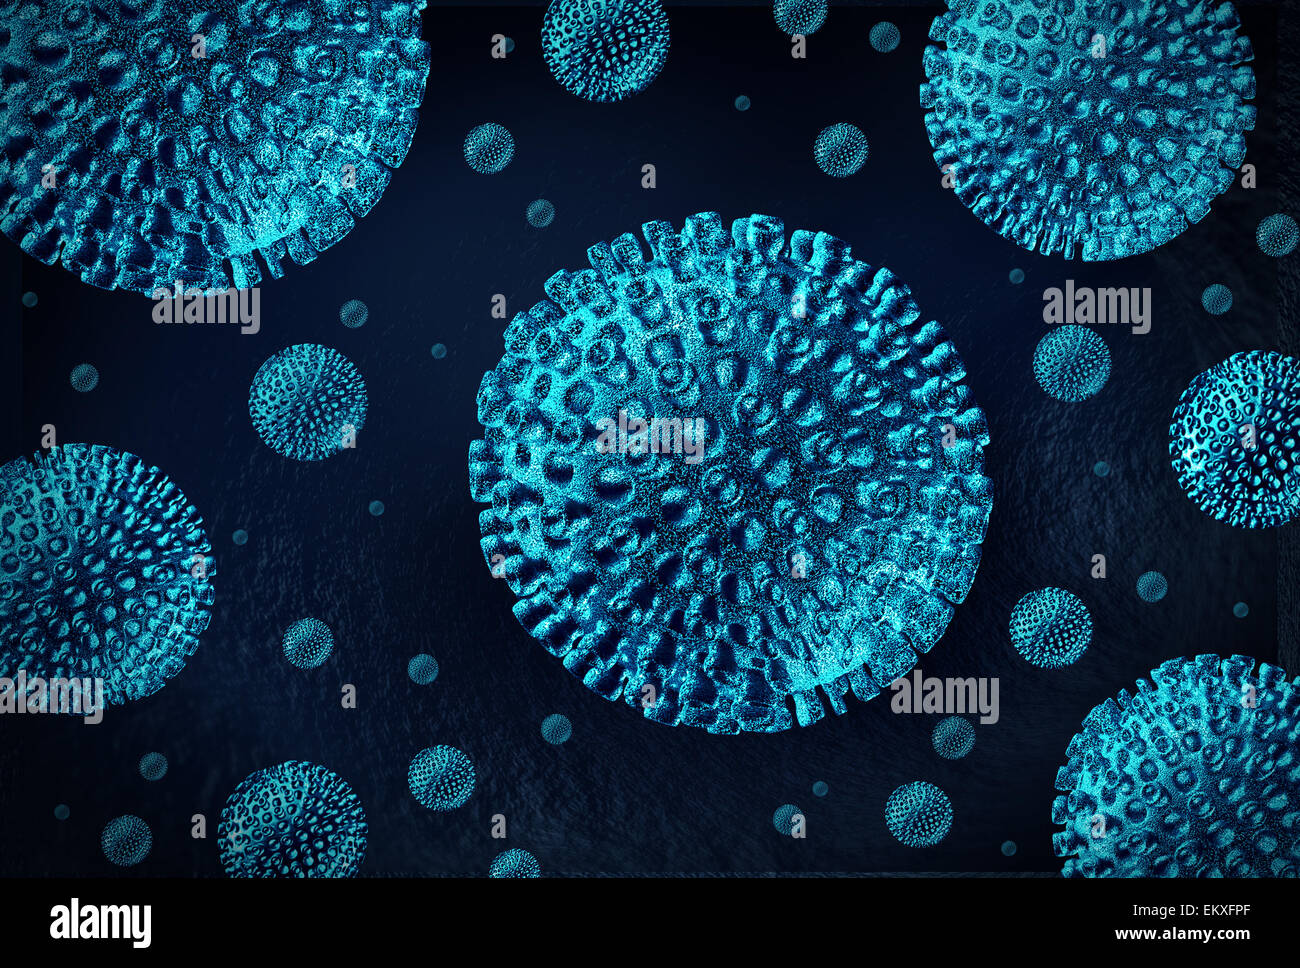 Hepatitis disease concept as a group of three dimensional human virus cells as a medical illustration for a viral infection. Stock Photo